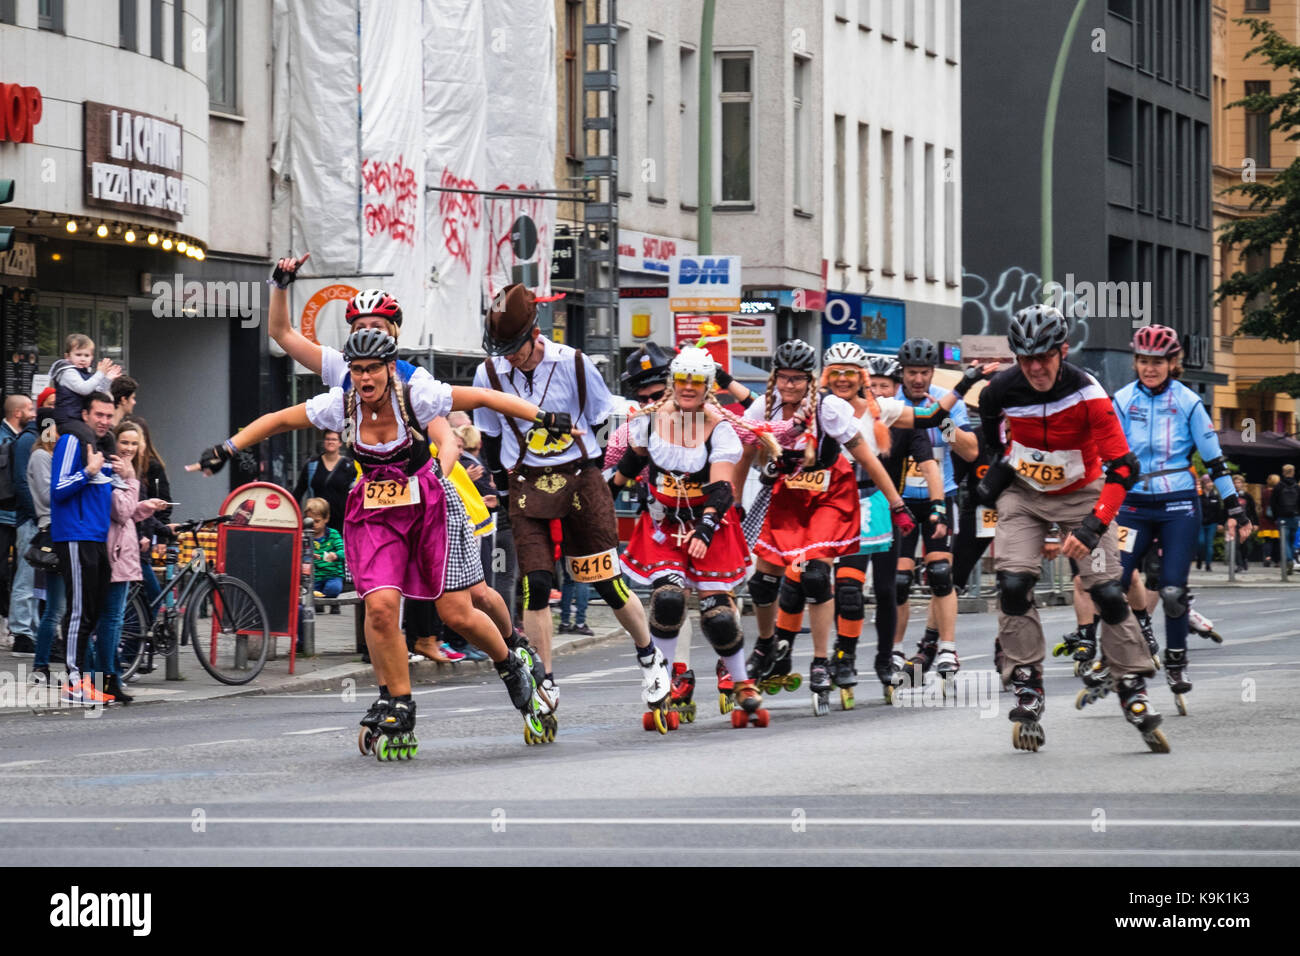 Berlin Germany. 23 September 2017, Annual In Line Skating Marathon. In line skaters pass through RosenthalePlatz as they compete in the annual roller skating event. Eden Breitz/Alamy Live News Stock Photo